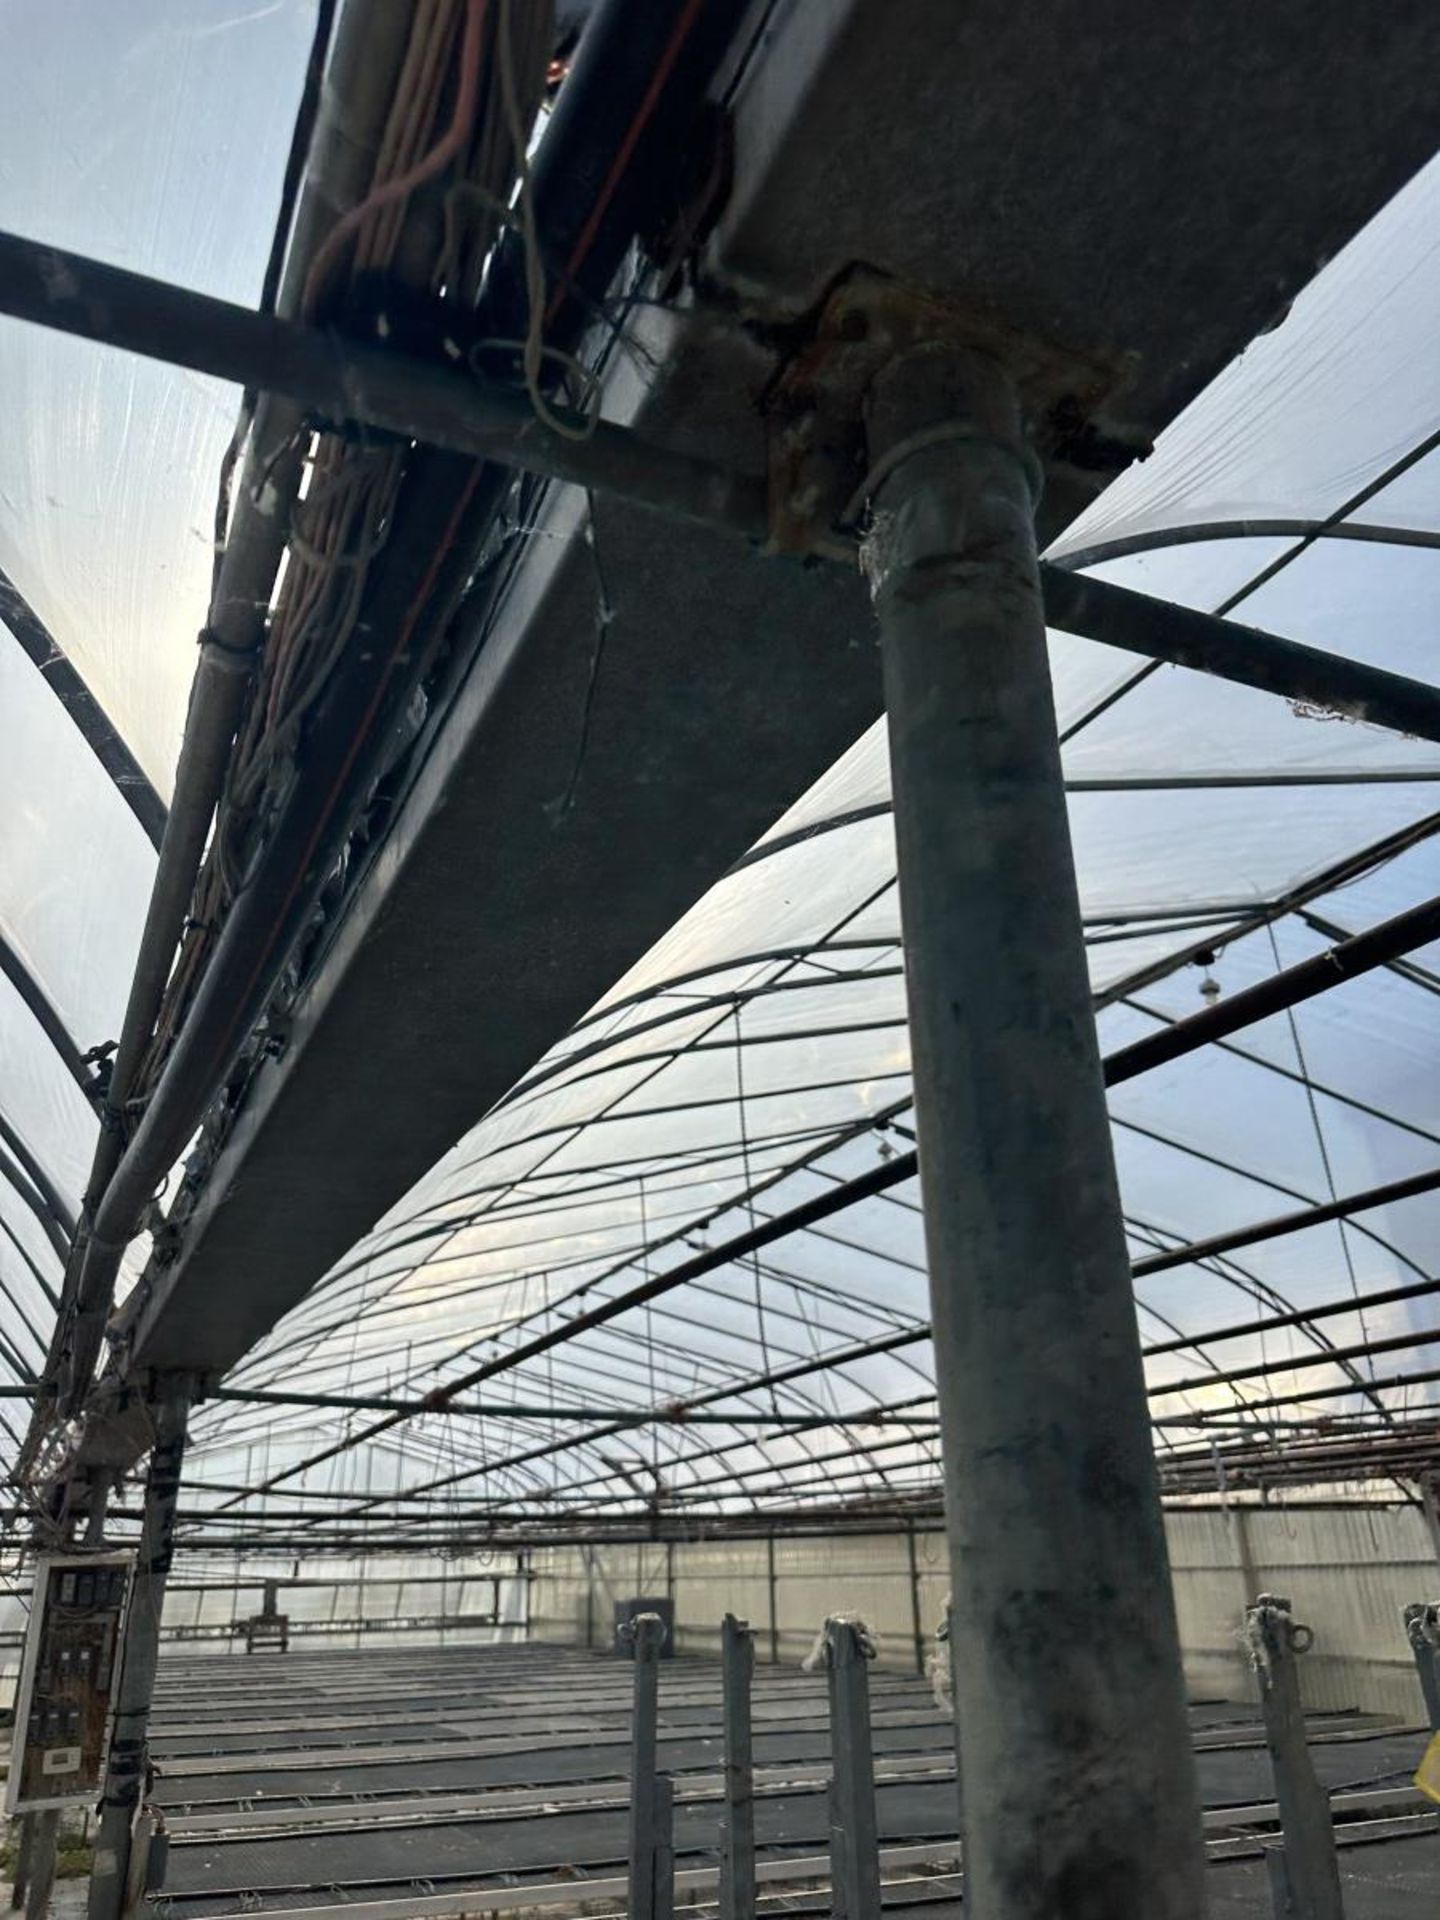 WESTBROOK GUTTER CONNECT 2-BAY GREENHOUSE 60FT X 144FT X 96” H & 2-BAY 60FT X 72 FT X 96”, INCLUDING - Image 54 of 95